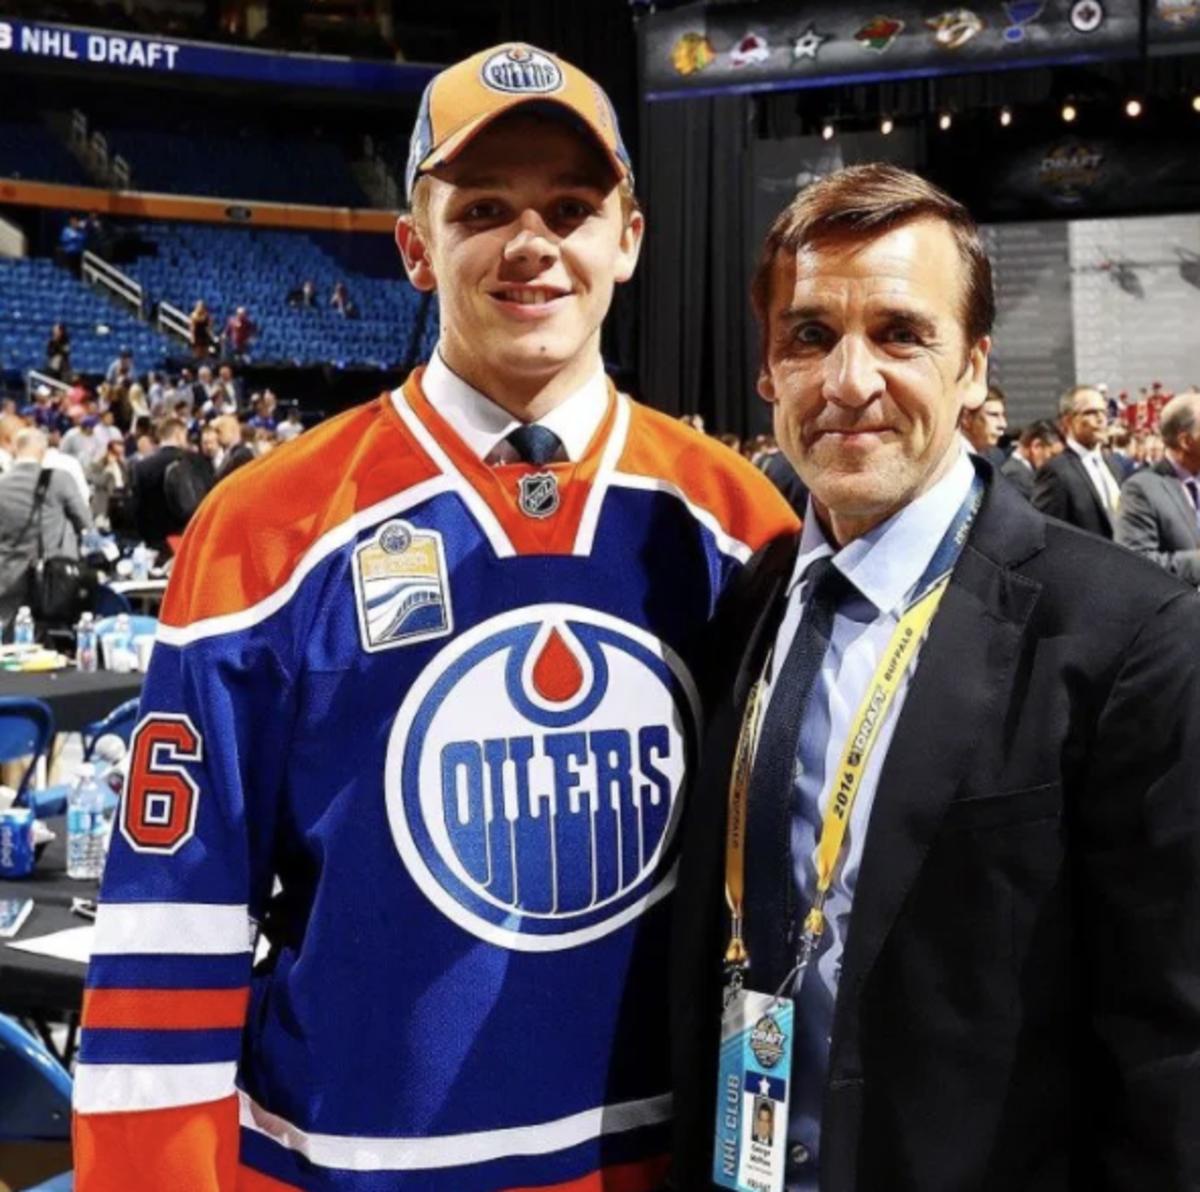 Graham and his father during the 2016 NHL Draft